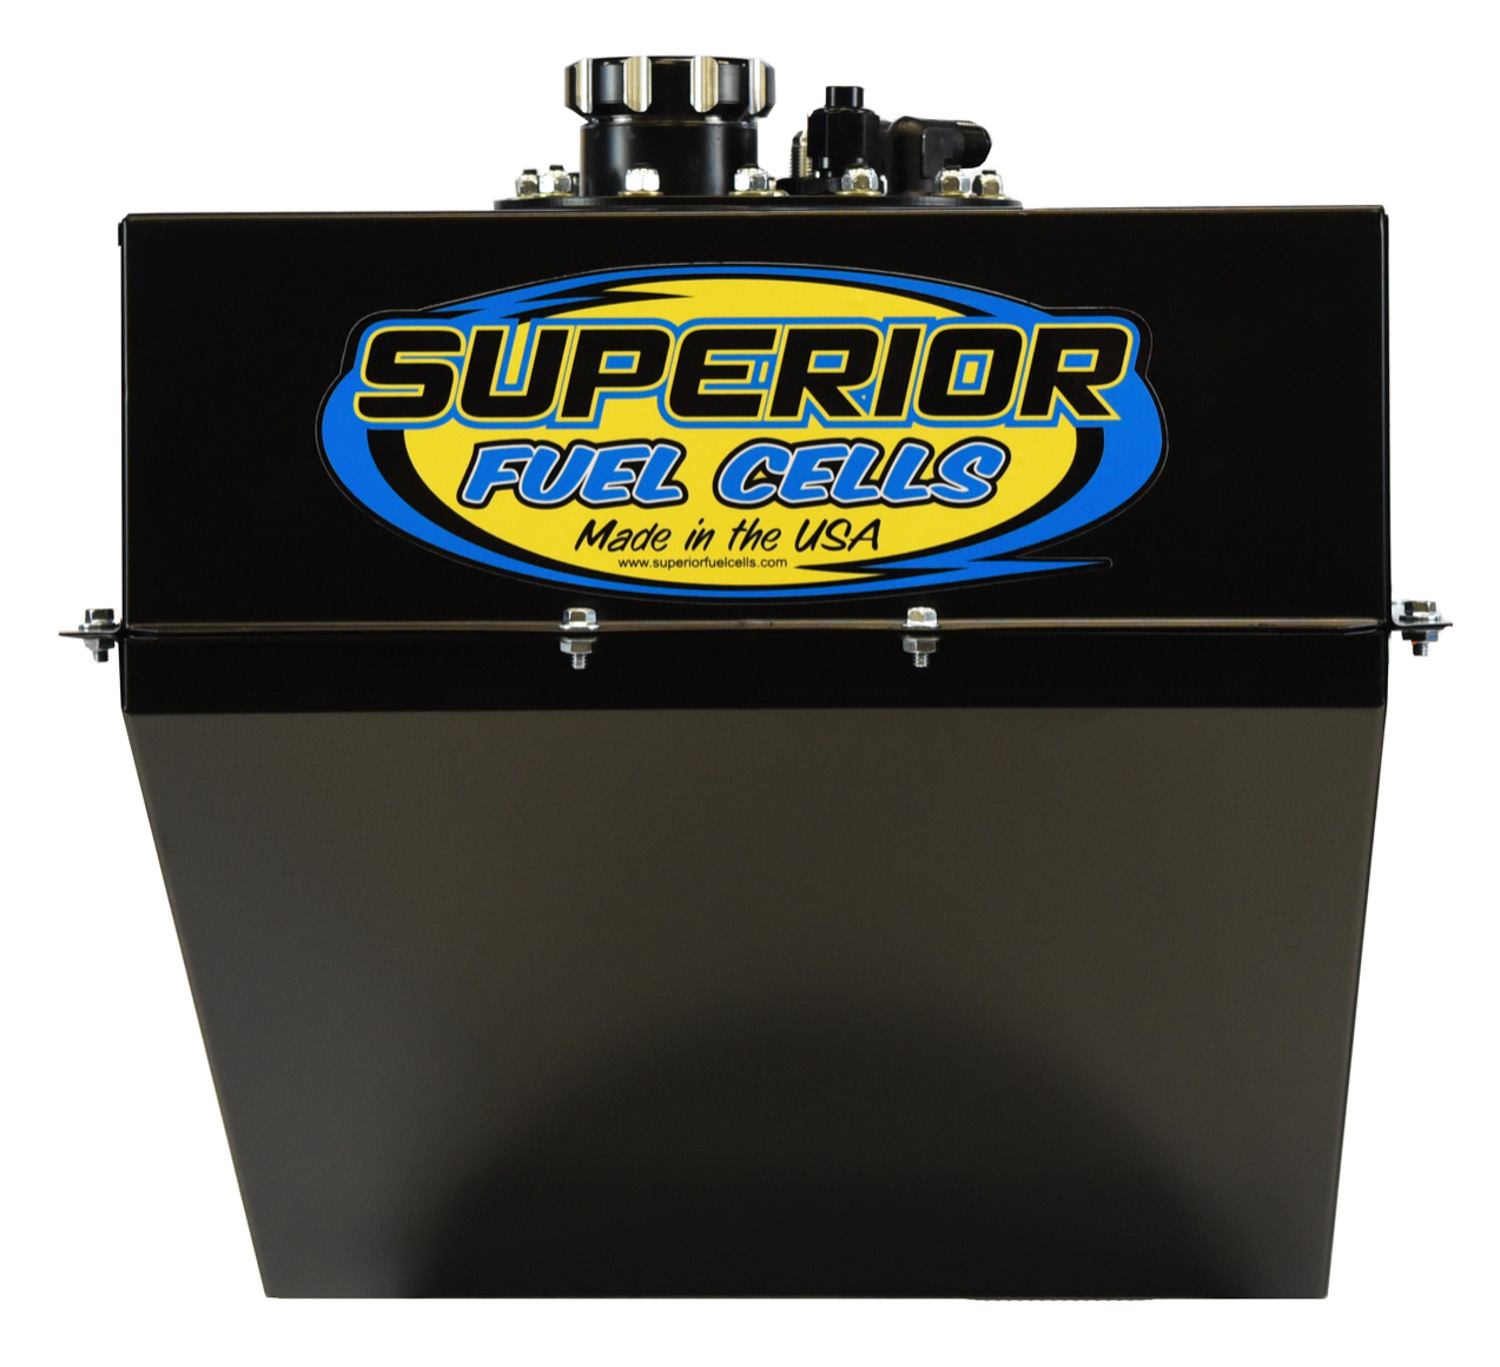 Superior Fuel Cells SFC16TF-BL-SFI Fuel Cell and Can, 16 gal, SFI, 20-3/4 in Deep x 16-1/2 in Wide, 10 AN Male Outlet, 8 AN Male Return, 6 AN Rollover Valve, Foam, Steel, Black Powder Coat, Dirt Late Model / Modified, Each